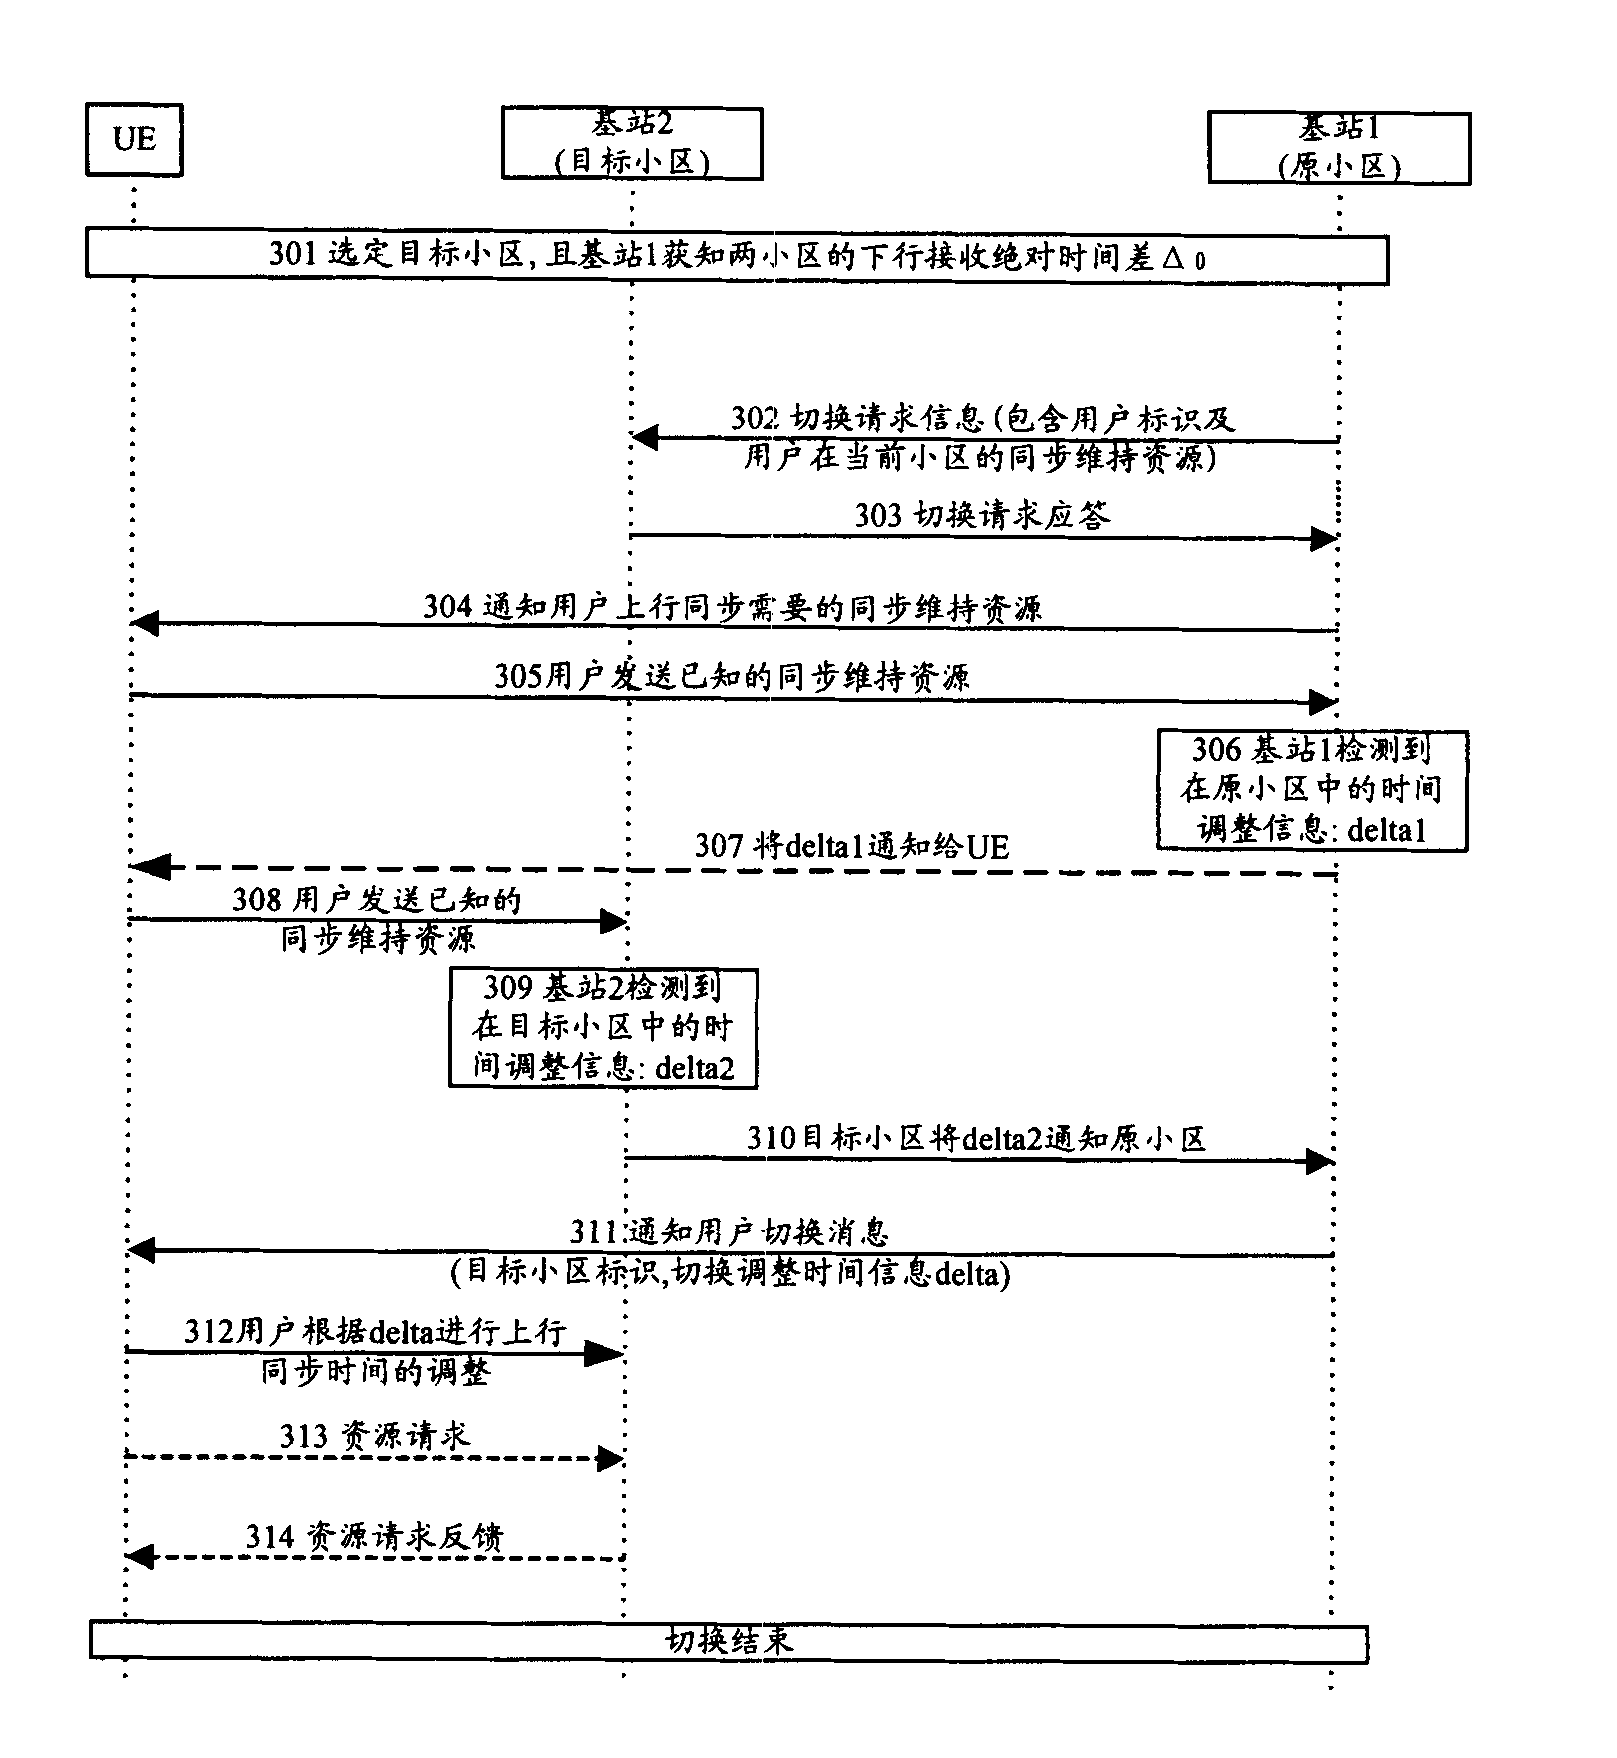 Method for realizing uplink synchronization during inter-cell switch process